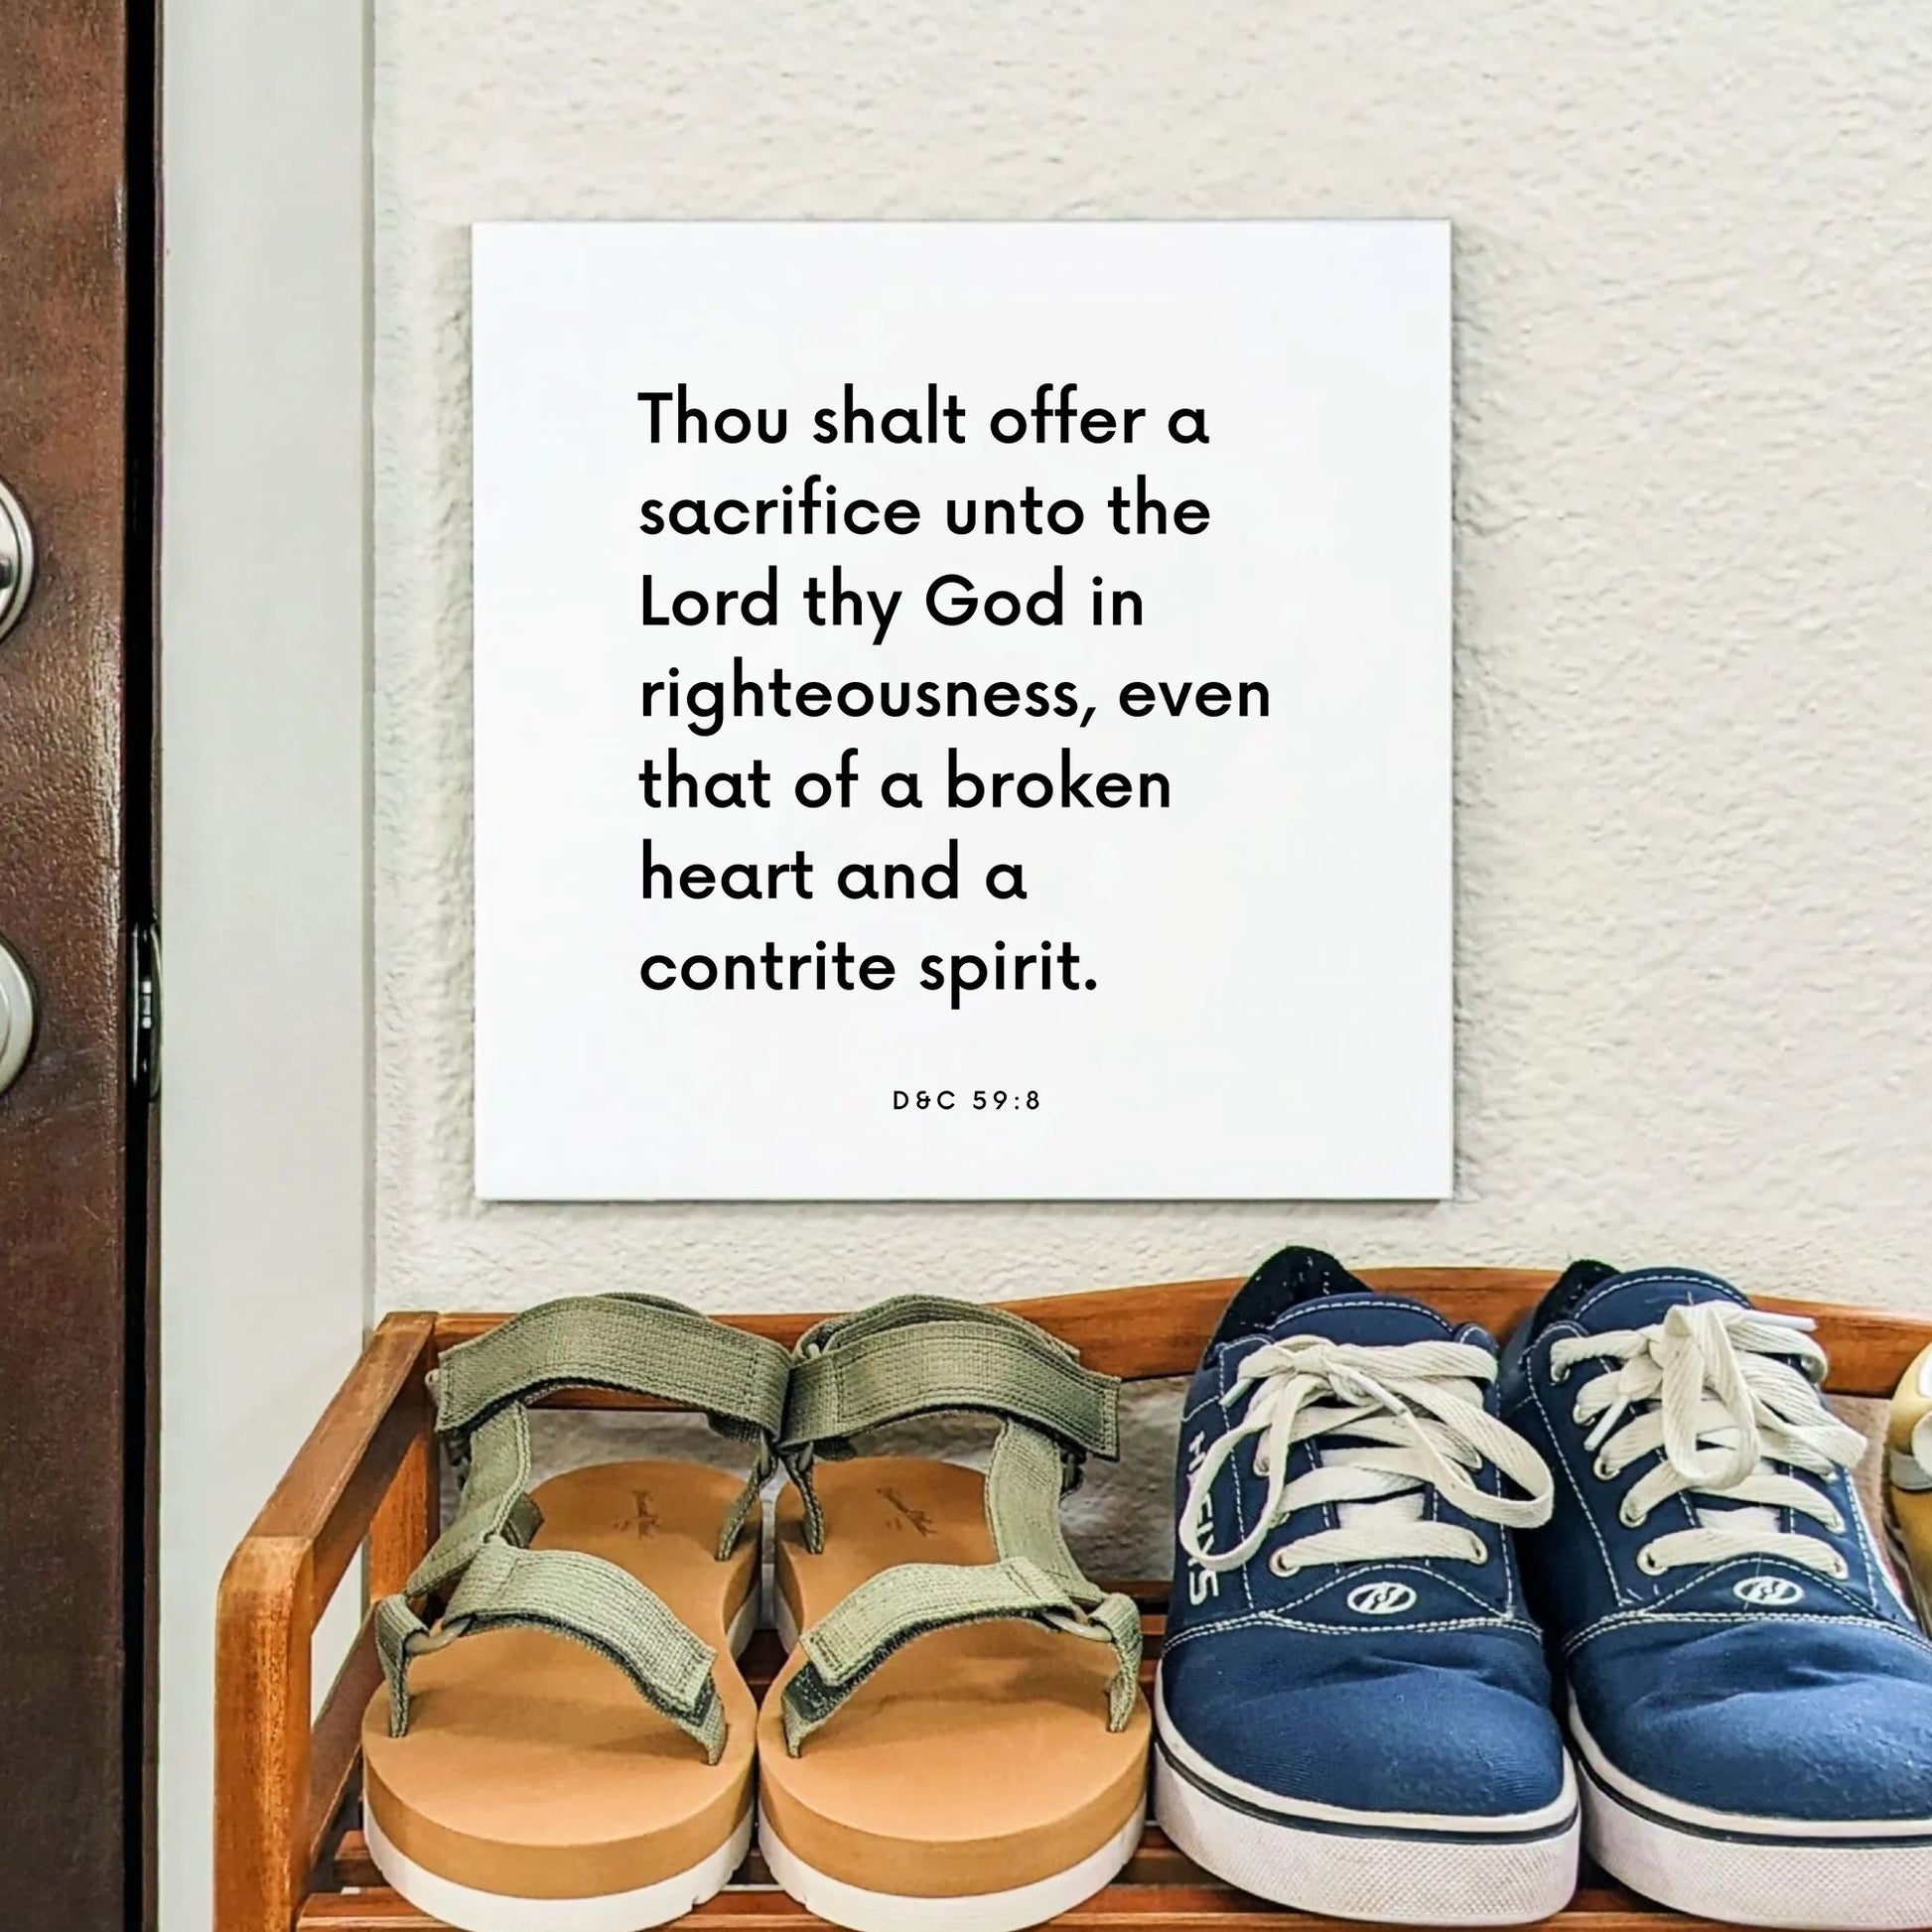 Shoes mouting of the scripture tile for D&C 59:8 - "Thou shalt offer a sacrifice unto the Lord thy God"